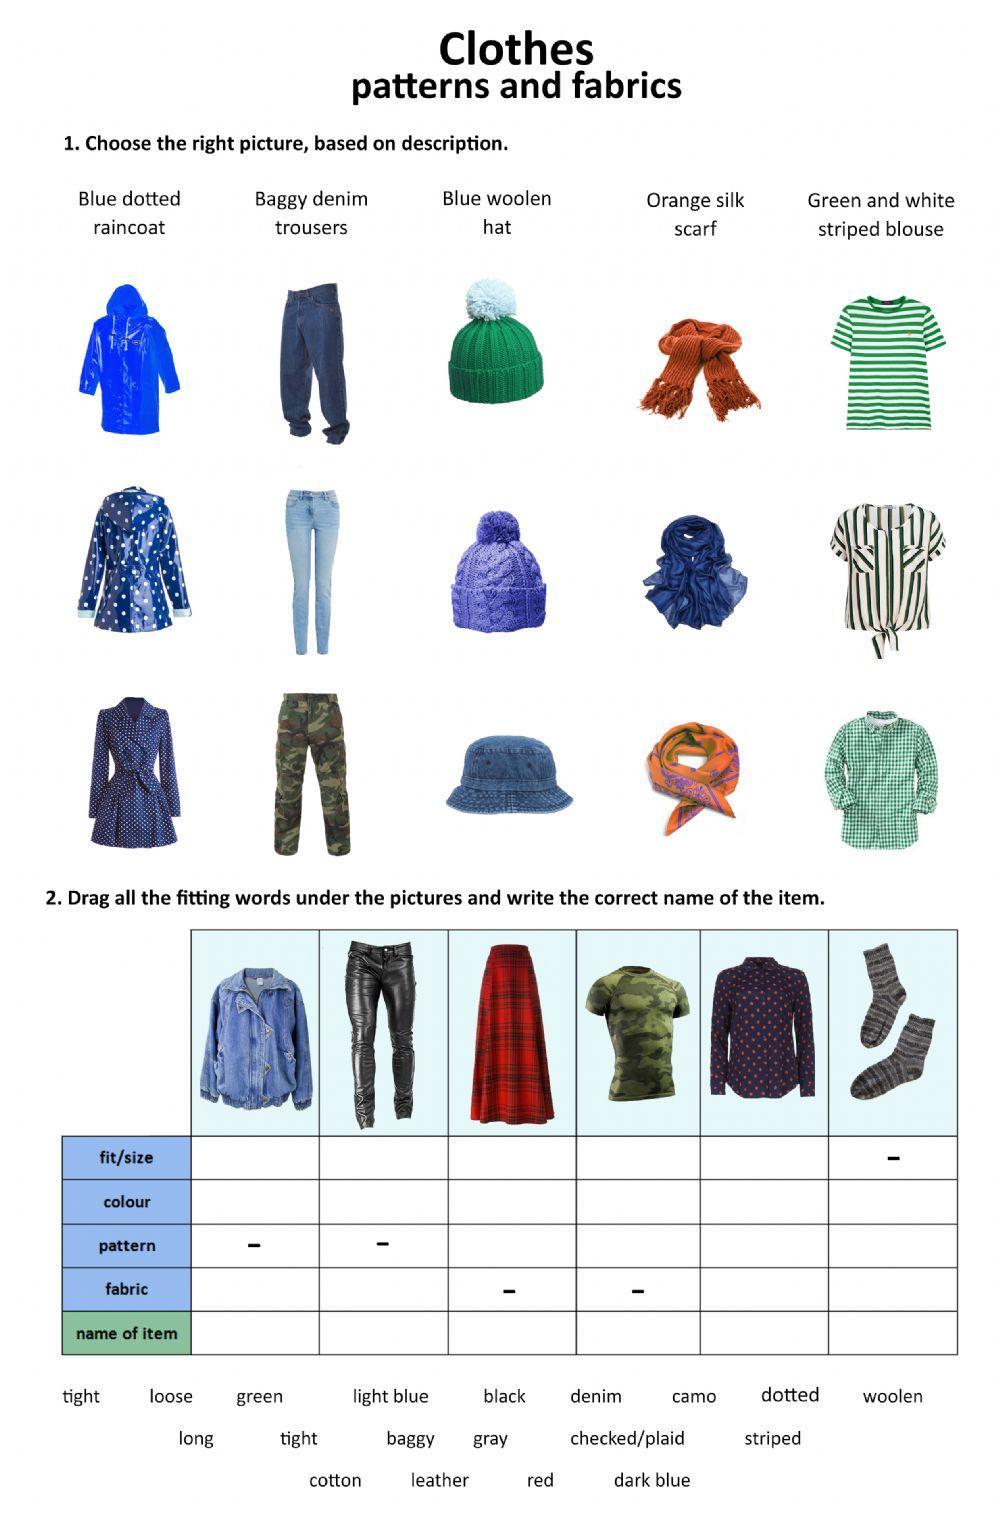 Clothes - patterns and fabrics